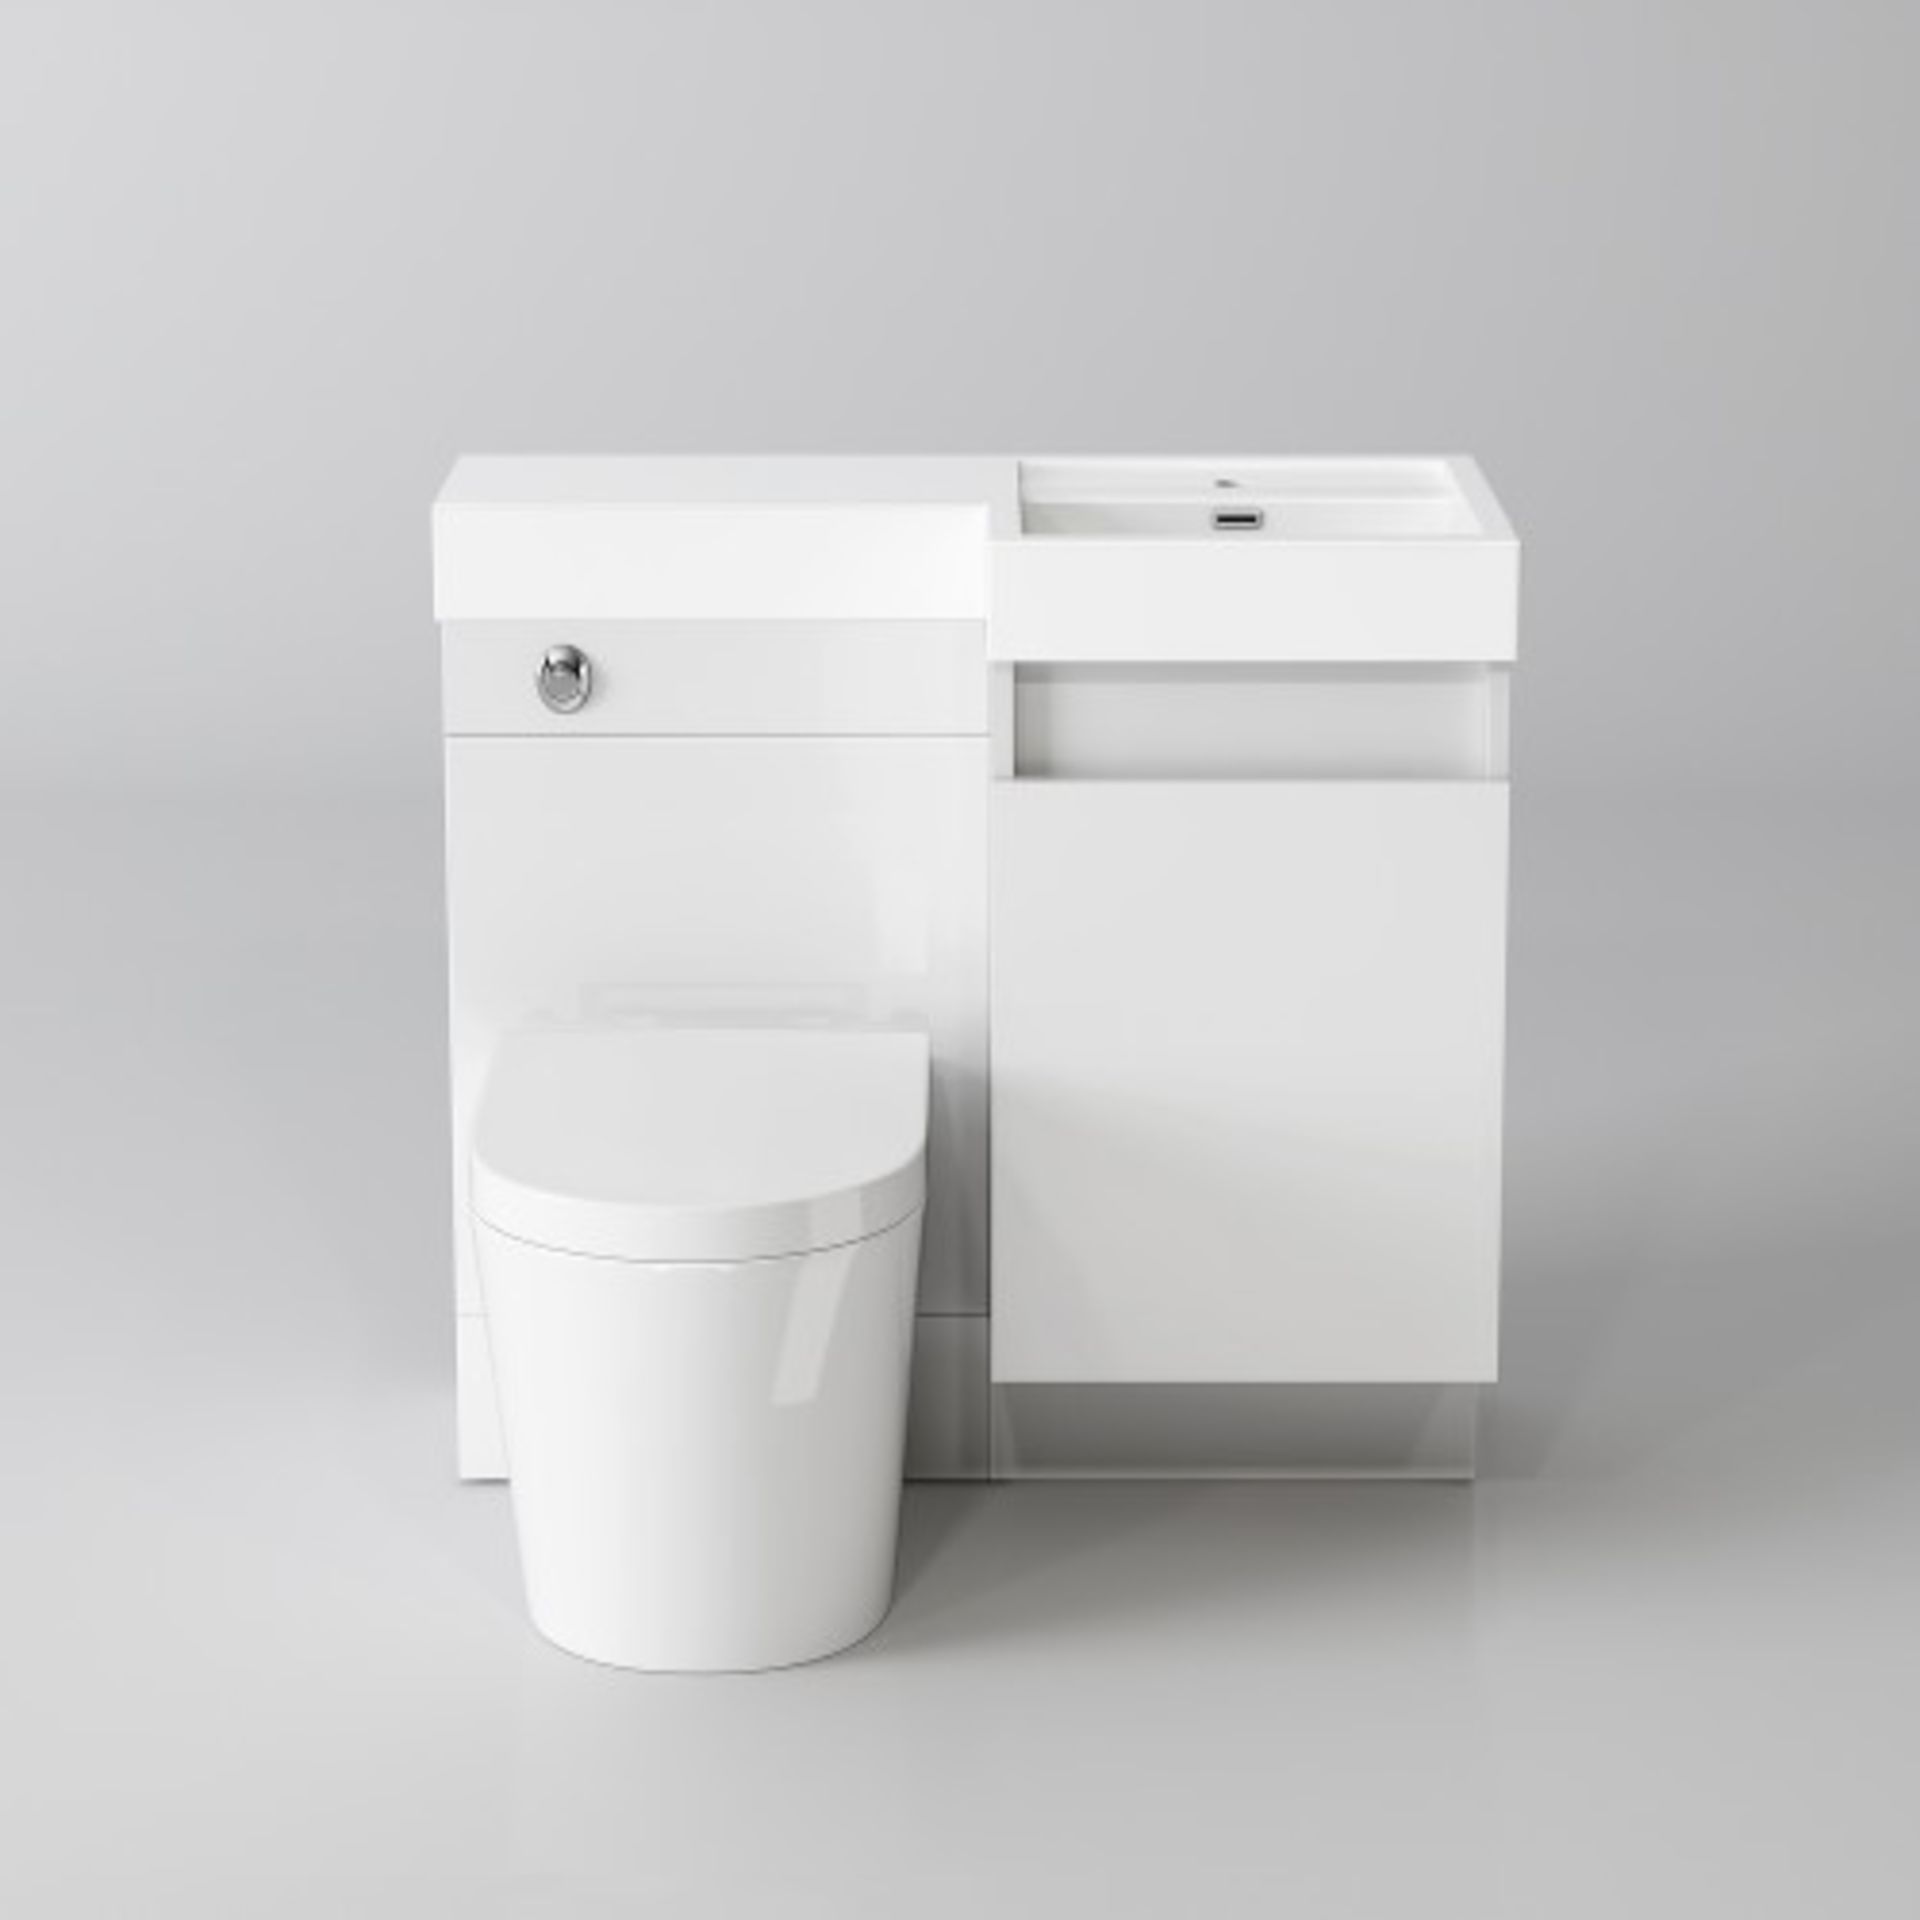 NEW & BOXED 906mm Olympia Gloss White Drawer Vanity Unit - Lyon Pan, Right Hand. Basin, Unit an... - Image 3 of 5